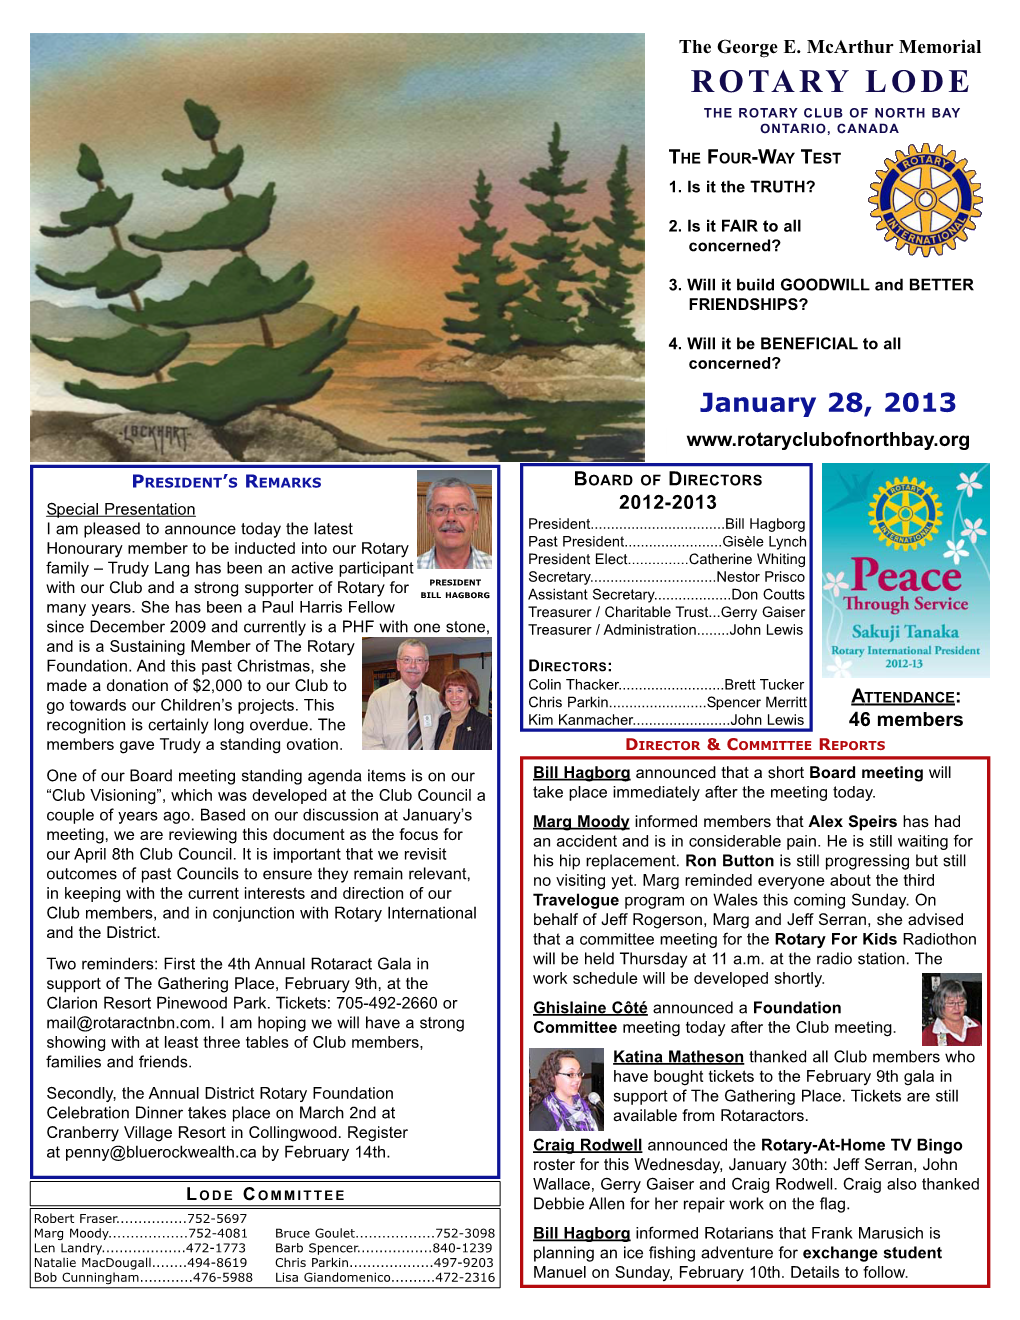 Rotary Lode the Rotary Club of North Bay Ontario, Canada